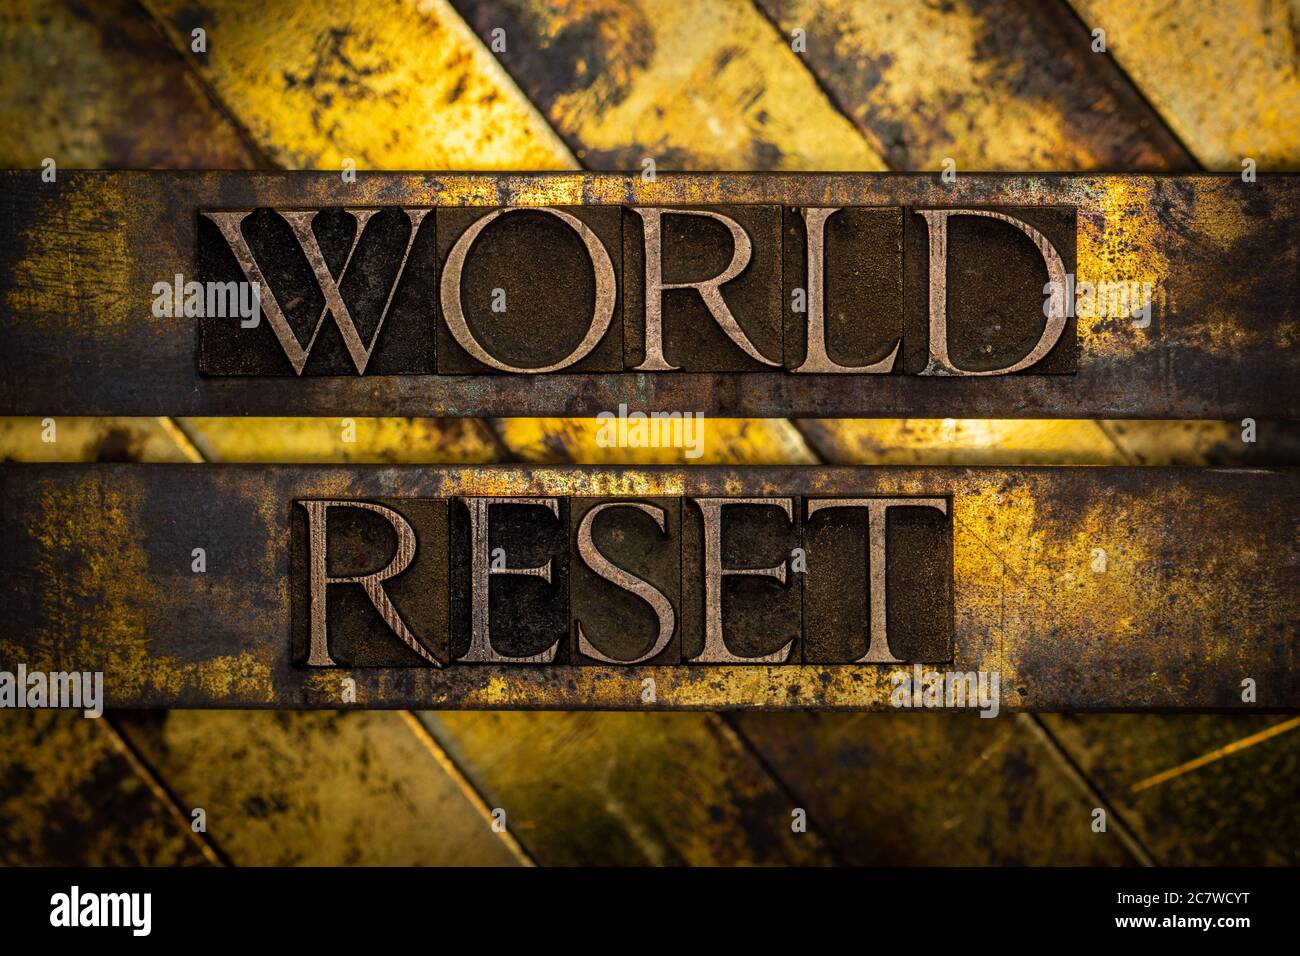 World Reset text formed with real authentic typeset letters on vintage textured silver grunge copper and gold background Stock Photo